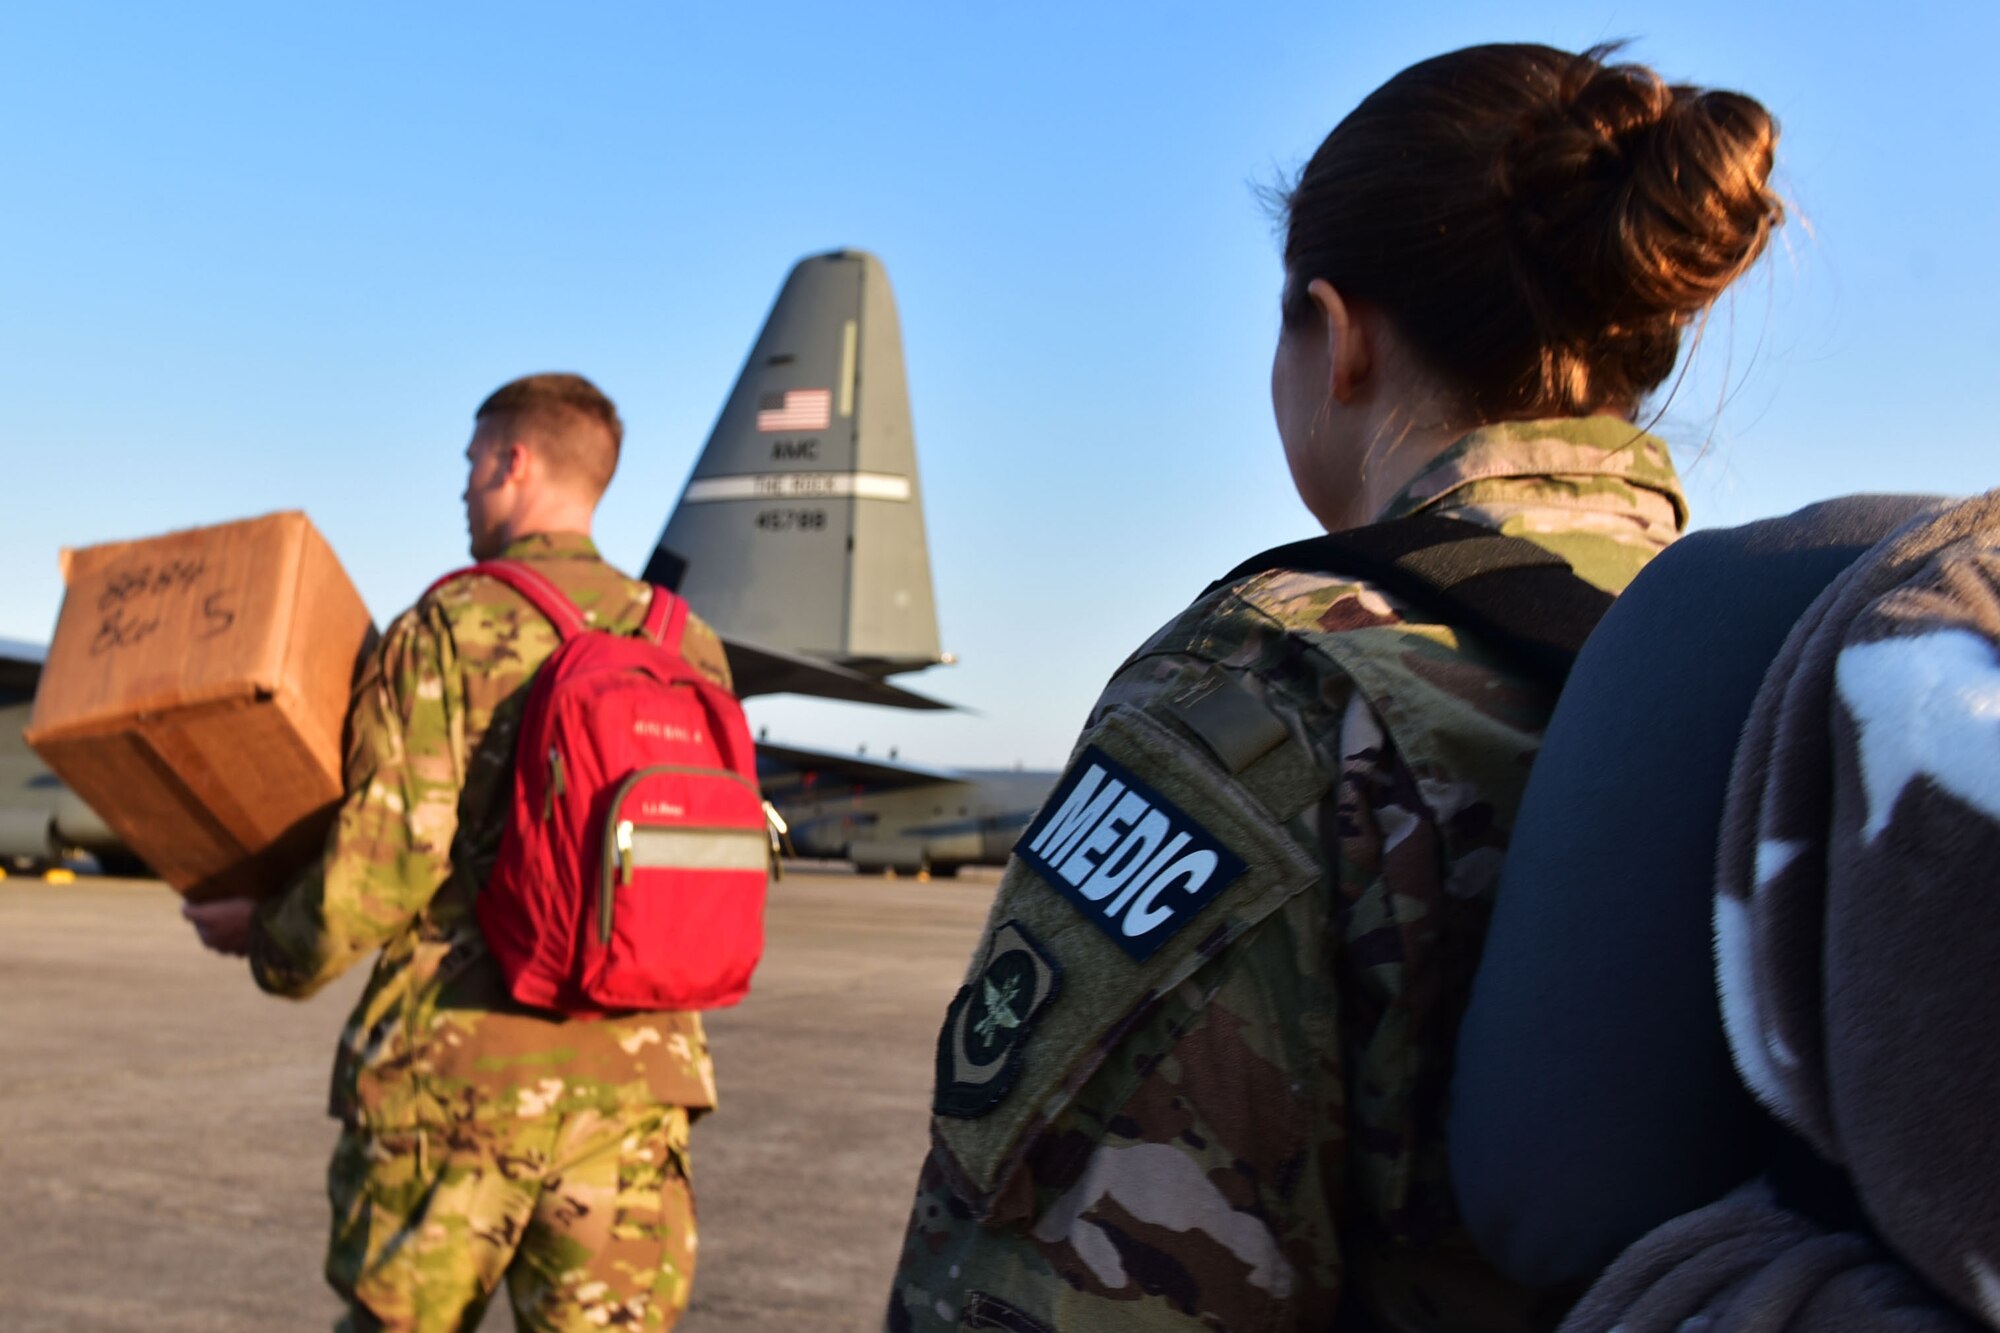 Tech. Sgt. Nicole Palko, 61st Airlift Squadron independent duty medical technician, boards a C-130J for deployment, at Little Rock Air Force Base, Ark. Palko will be providing medical support in the field for Team Little Rock members and others. (U.S. Air Force photo by Airman Rhett Isbell)